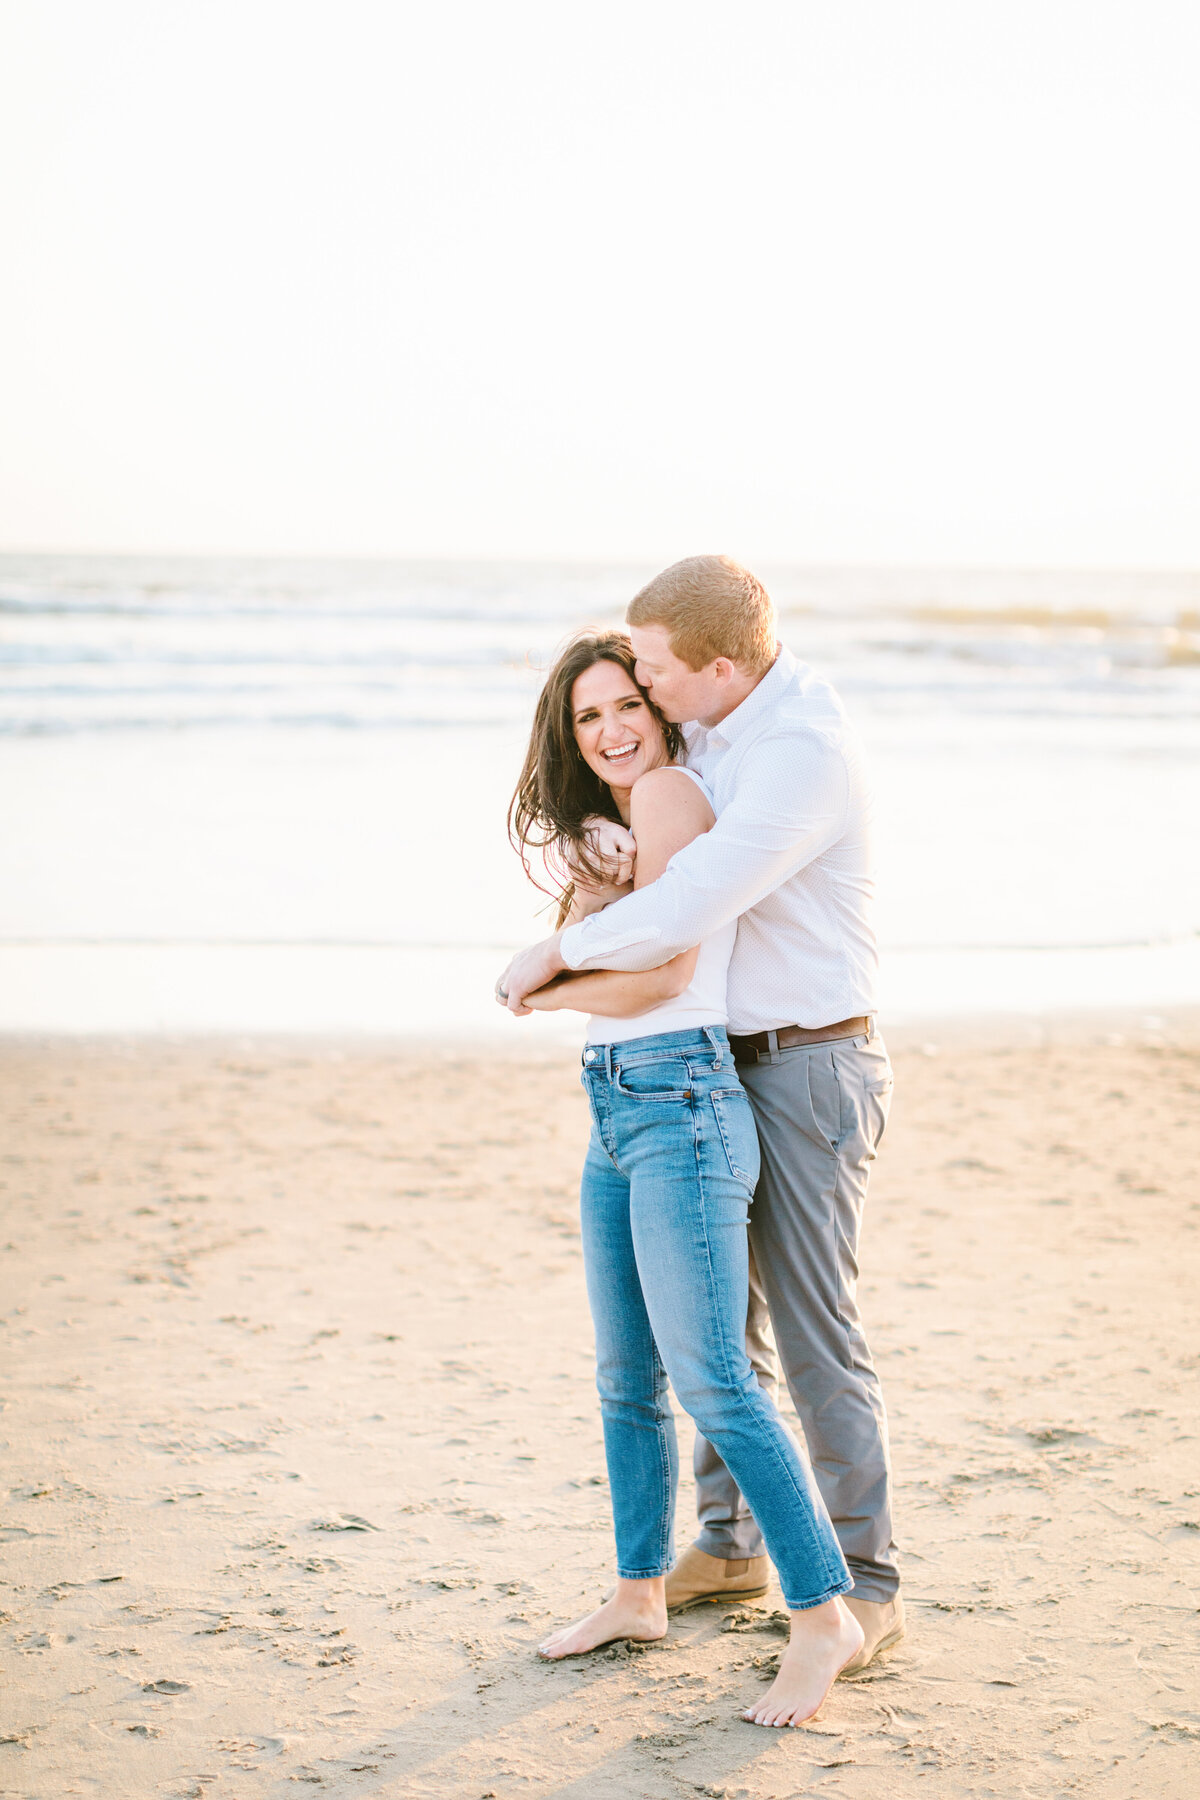 Best California and Texas Engagement Photos-Jodee Friday & Co-141